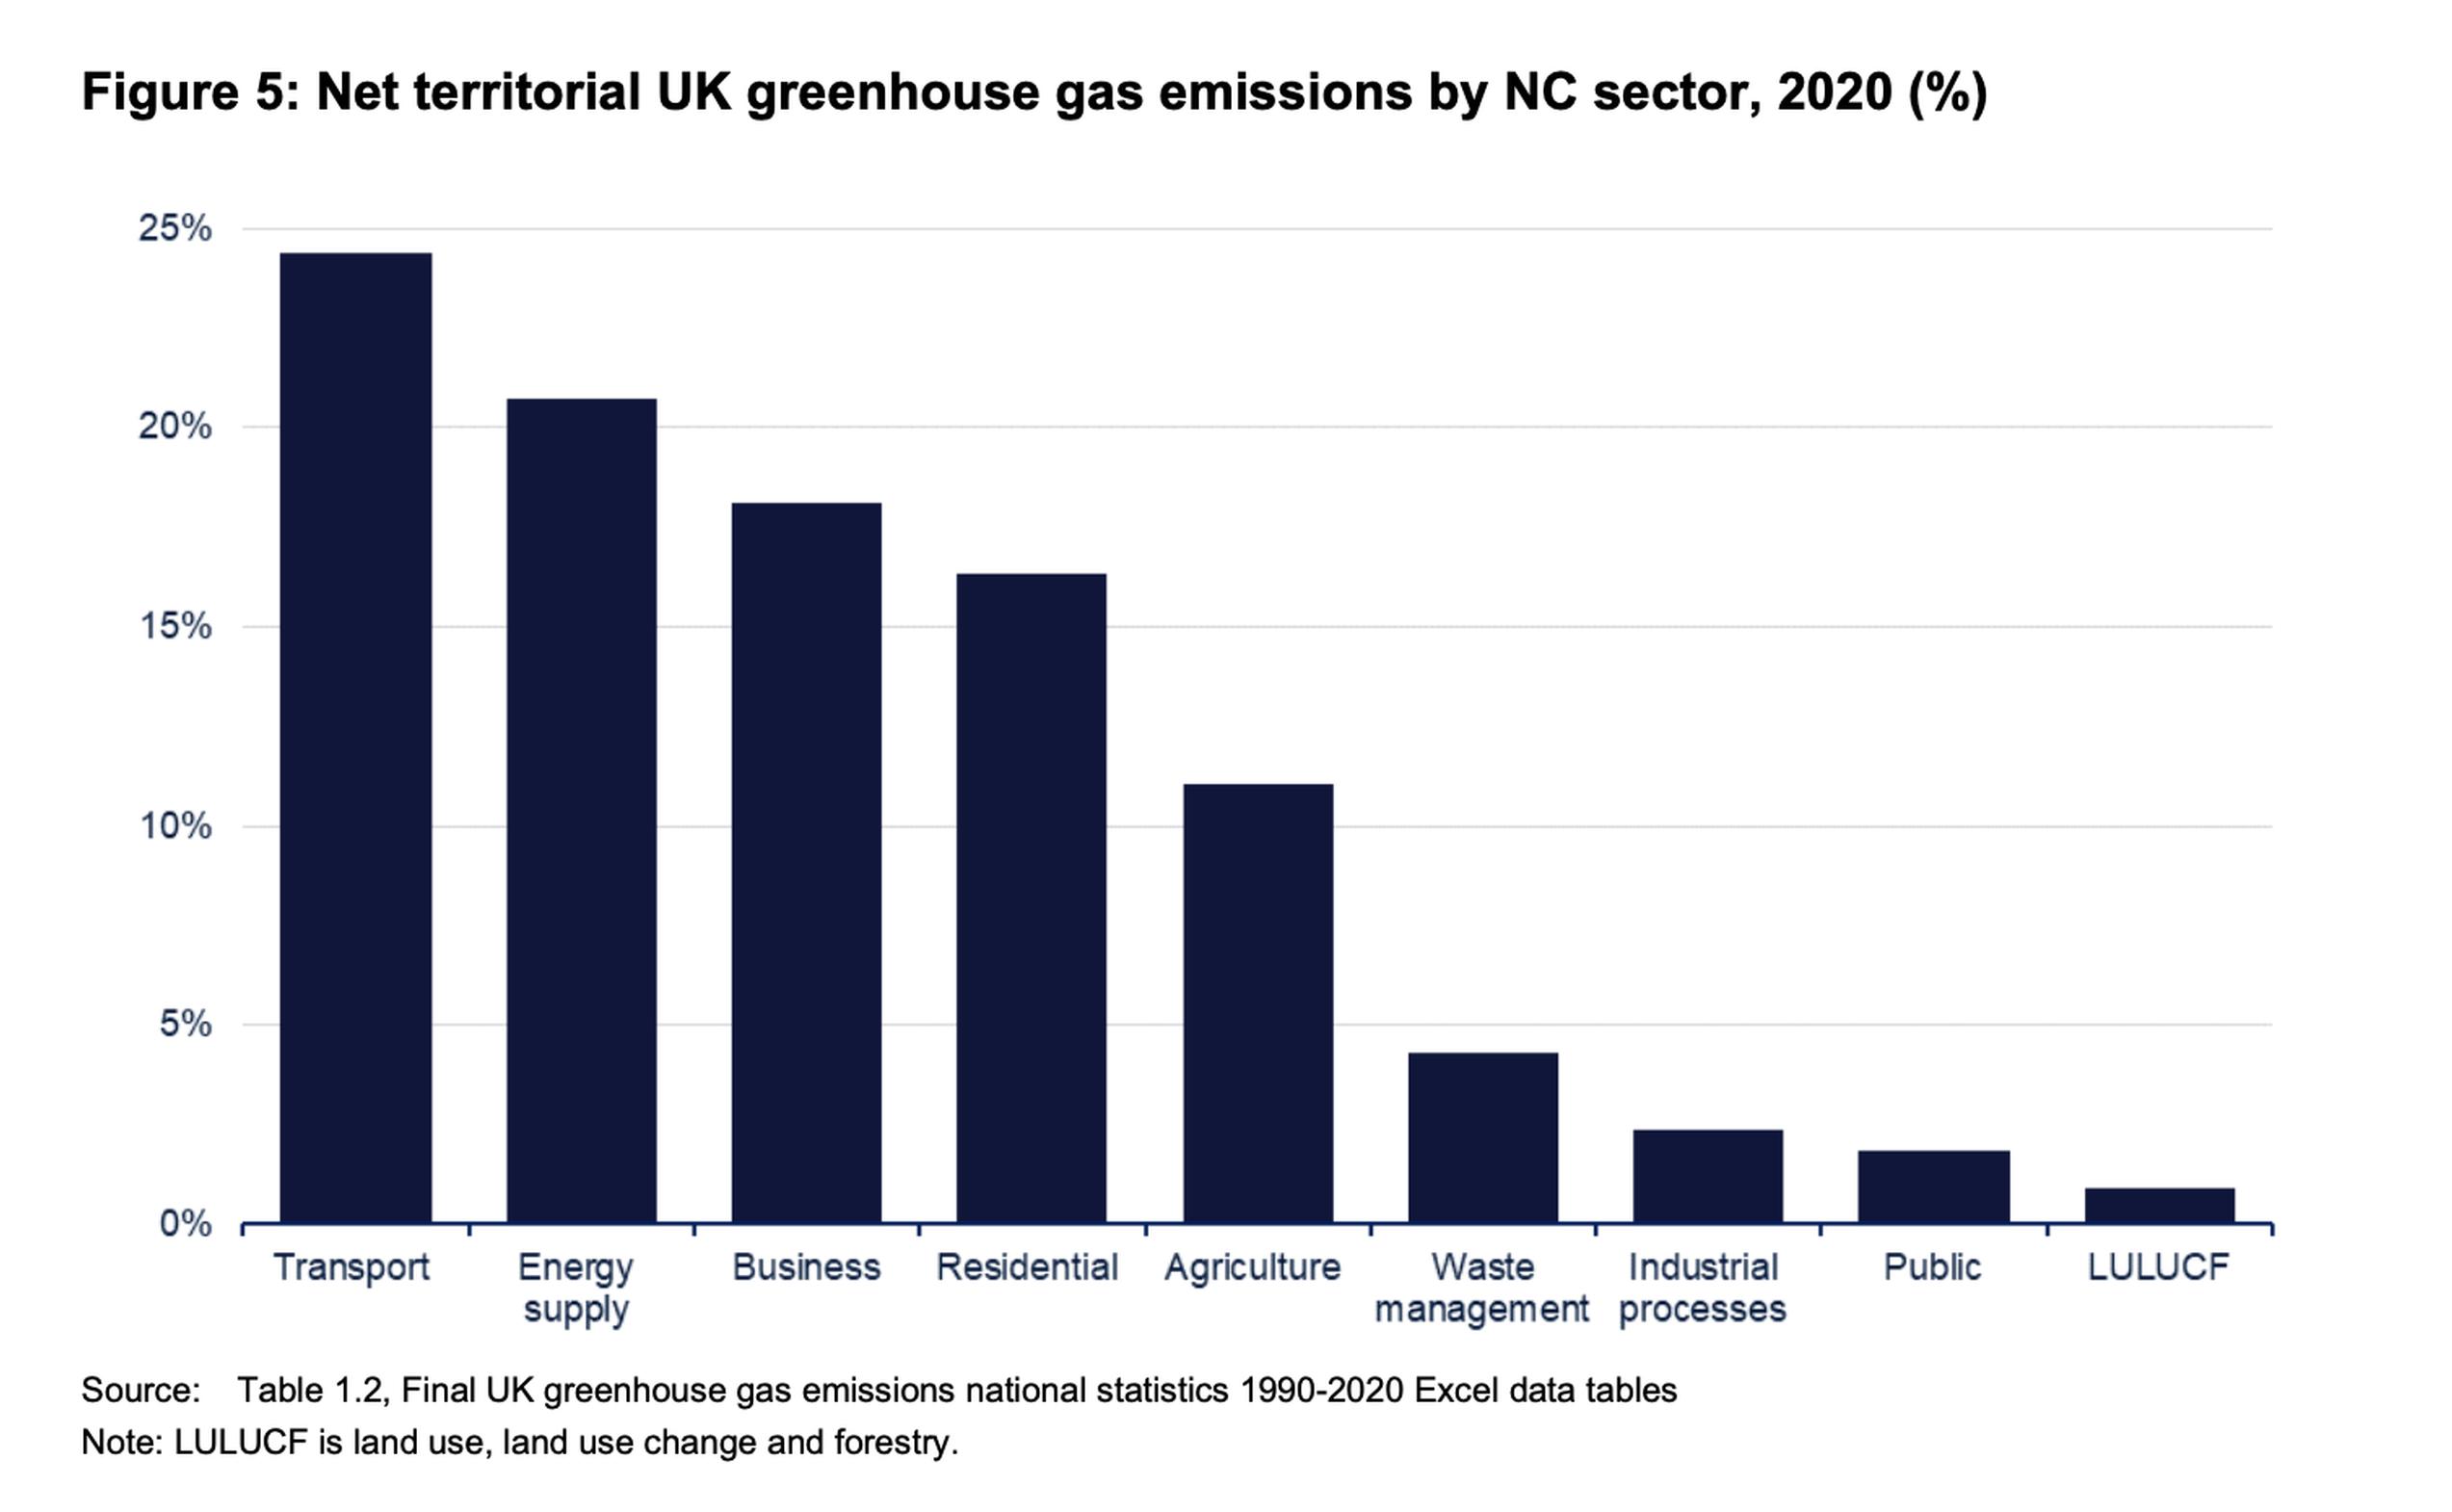 Net territorial UK greenhouse gas emissions by NC sector, 2020 (%)